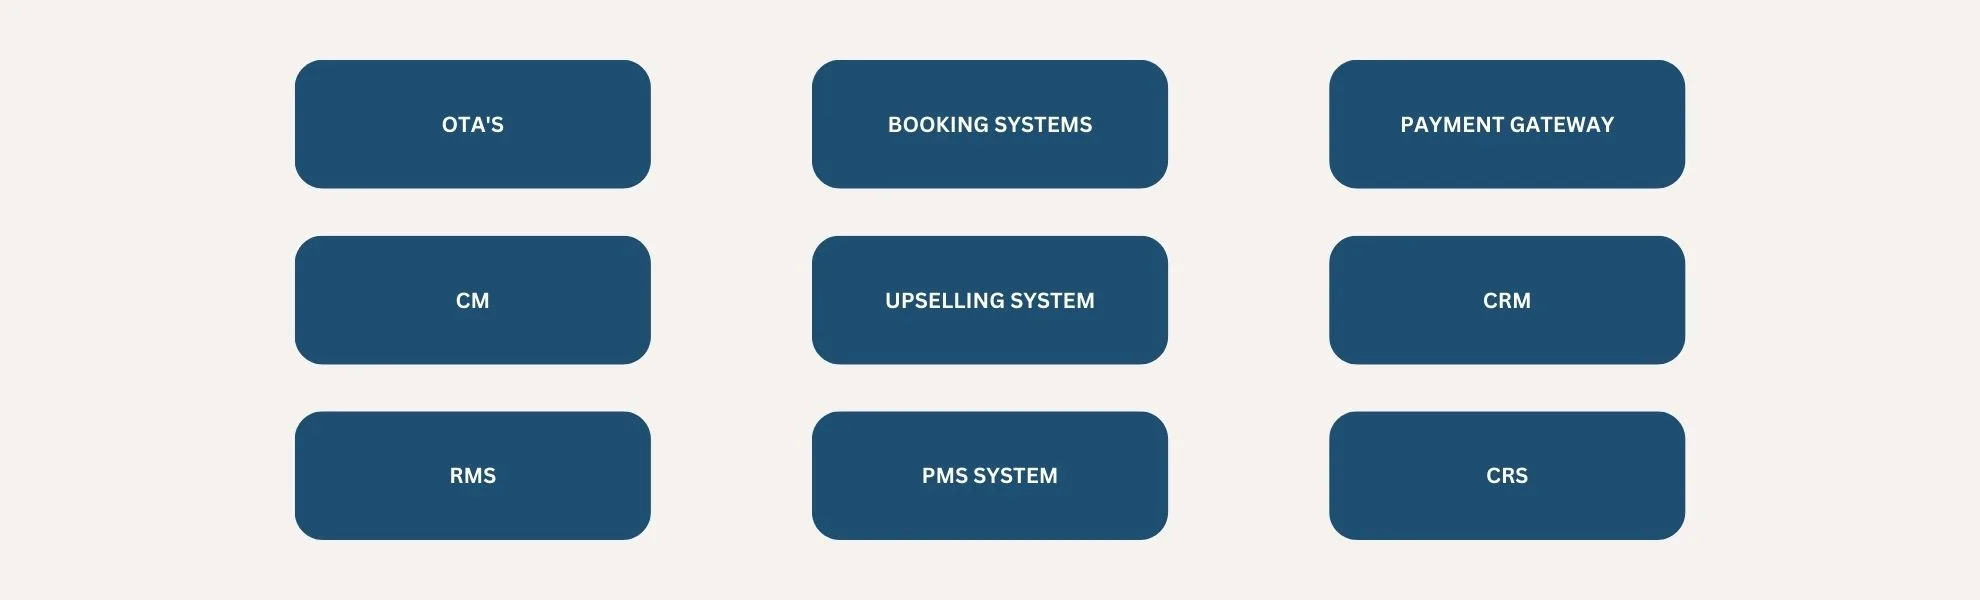 Upselling Unleashed: How The Modern Hotel Technology Stack is Maximizing Revenue